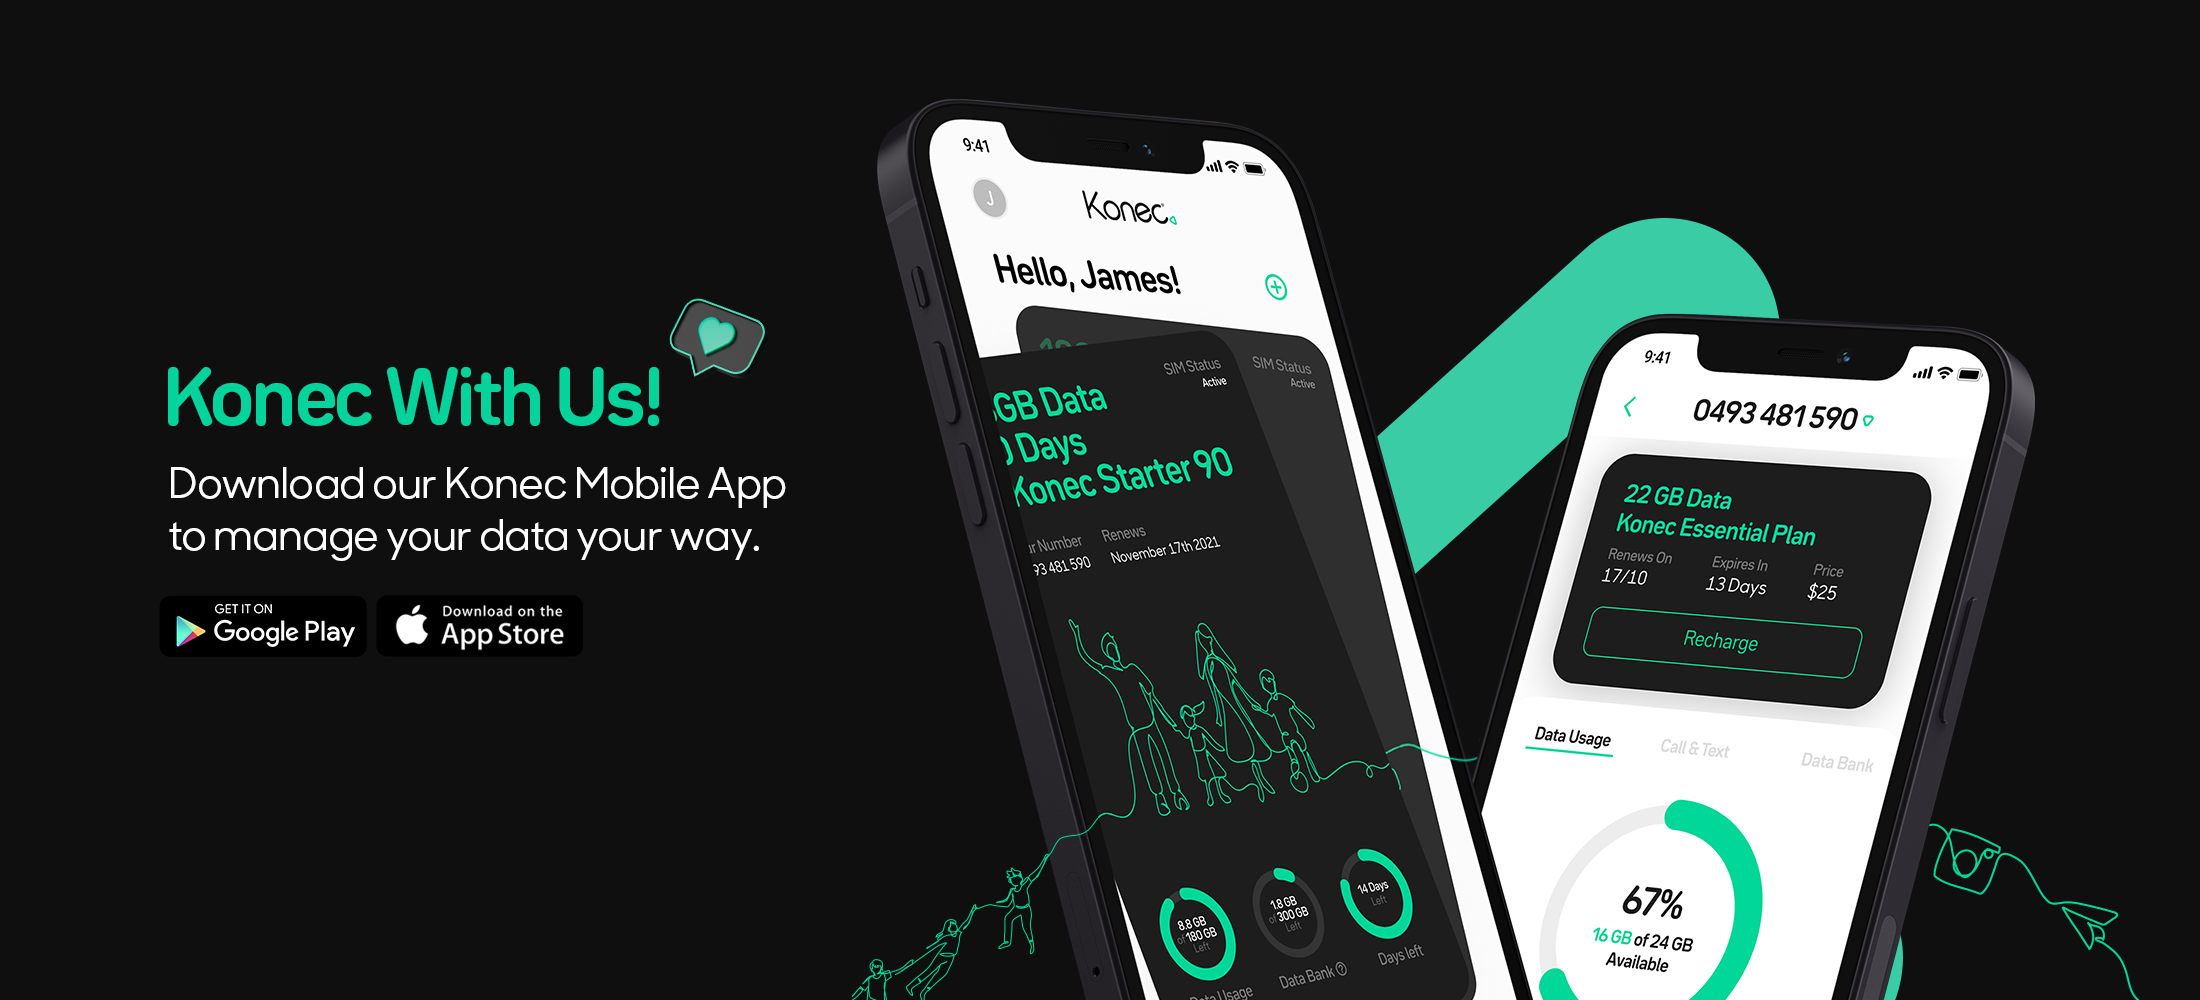 Download Konec Mobile App to mange your data your way